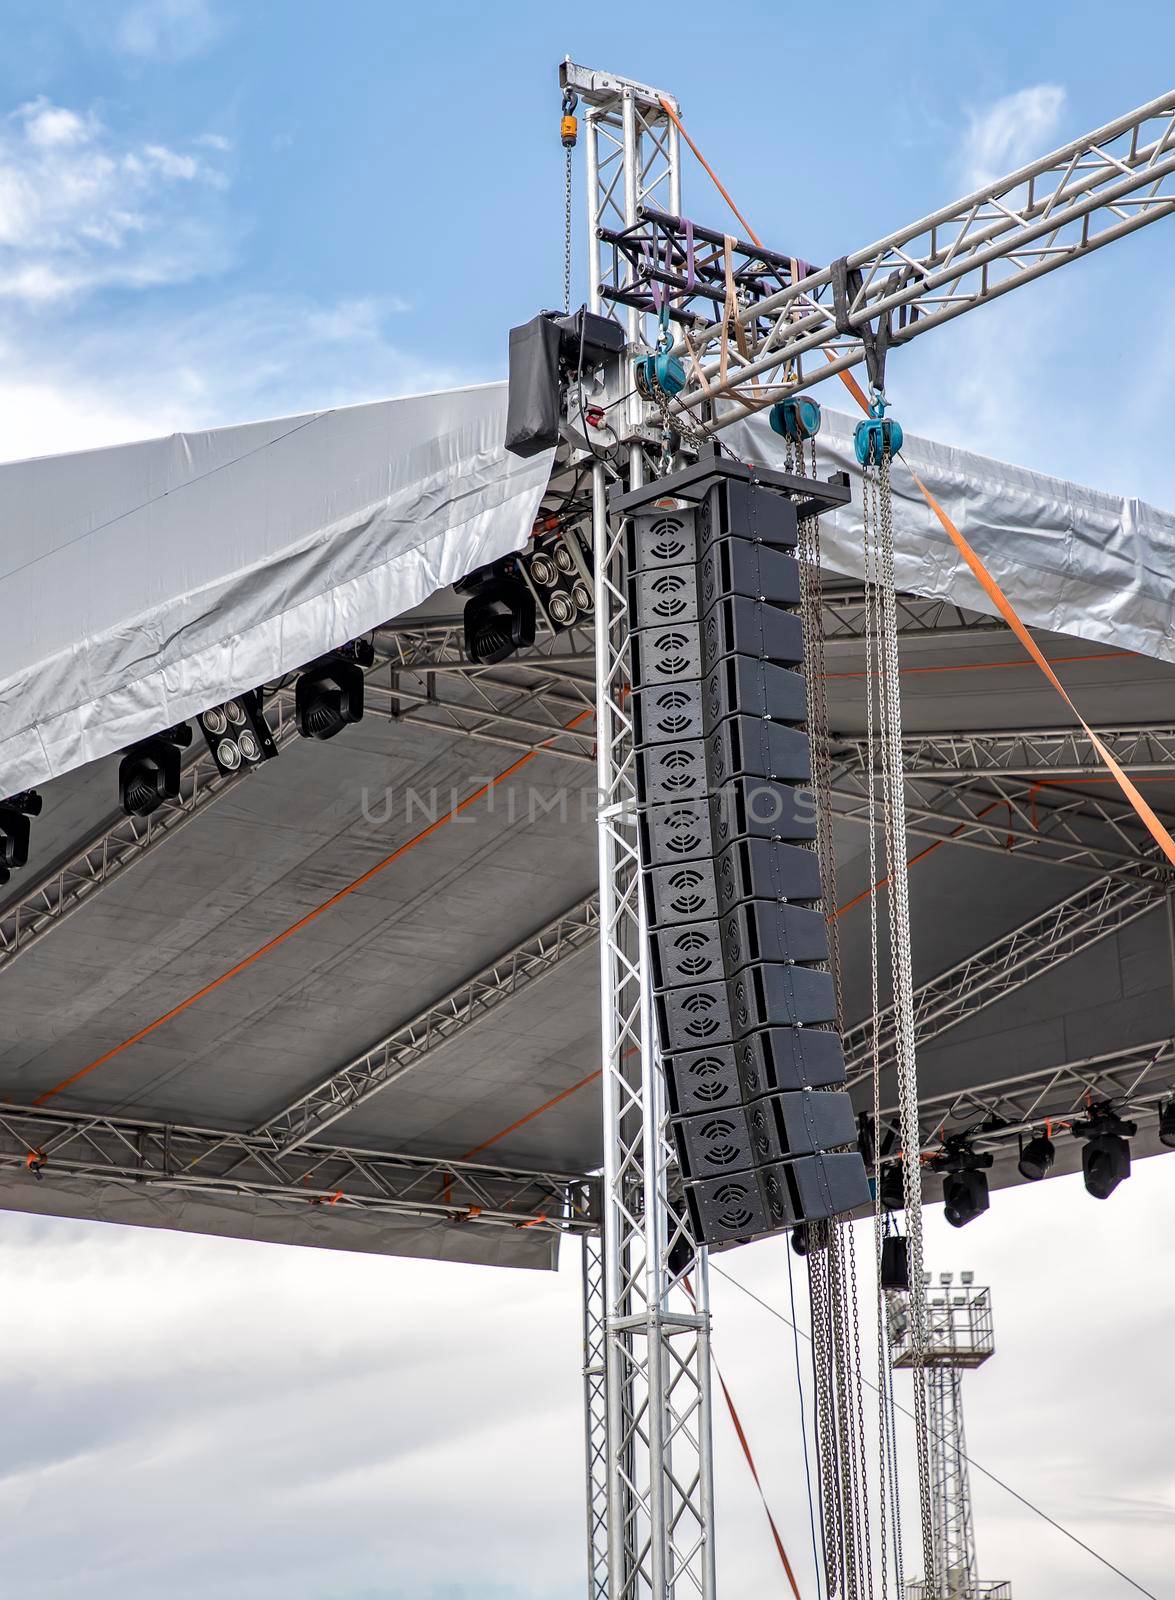 stage lighting and sound equipment on the outdoor stage before a concert by EdVal